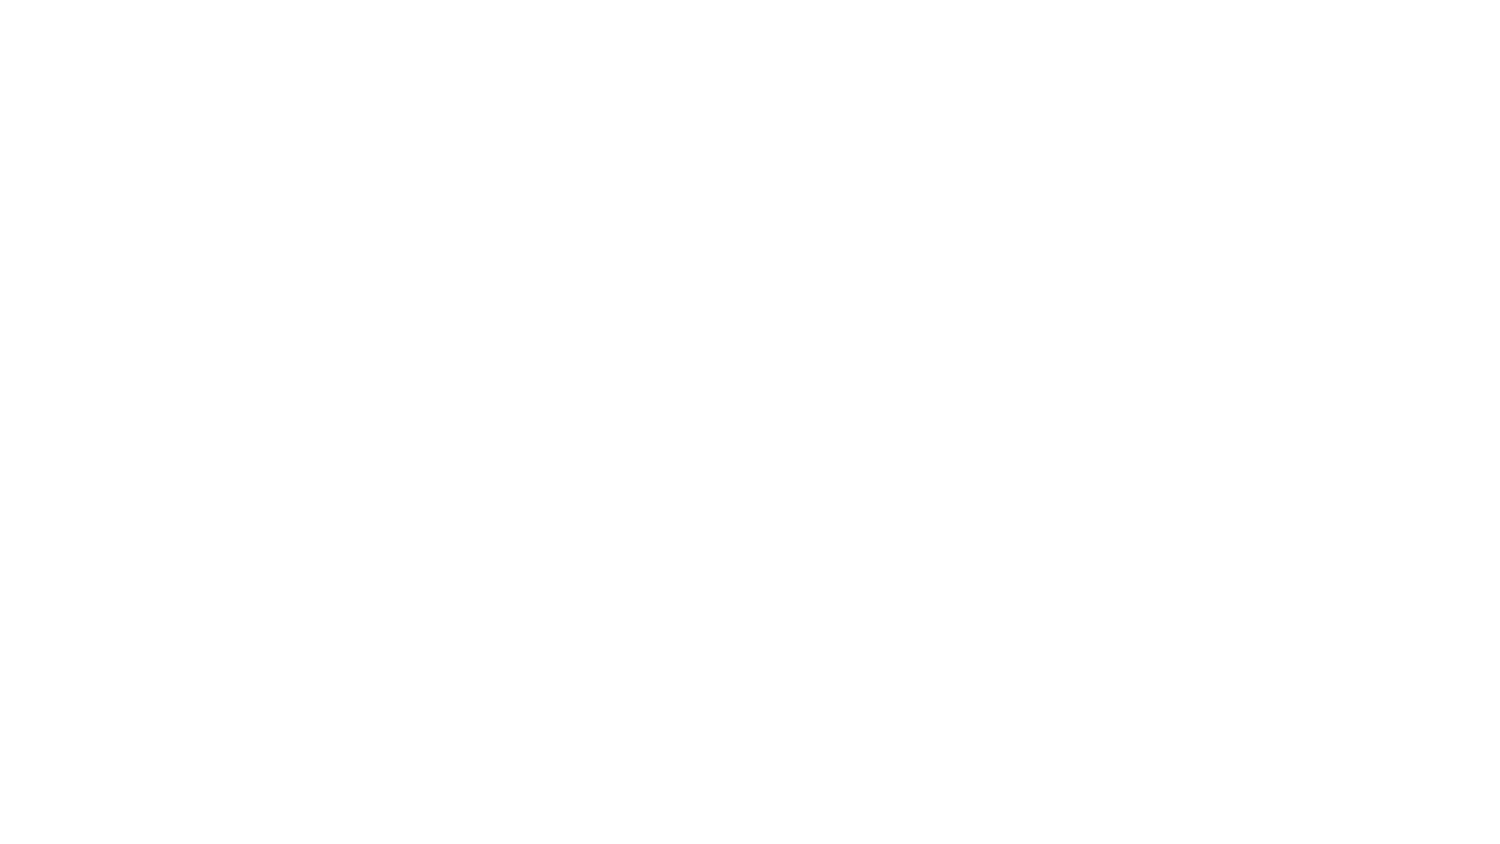 REVERENCE INTIMATE PORTRAITS